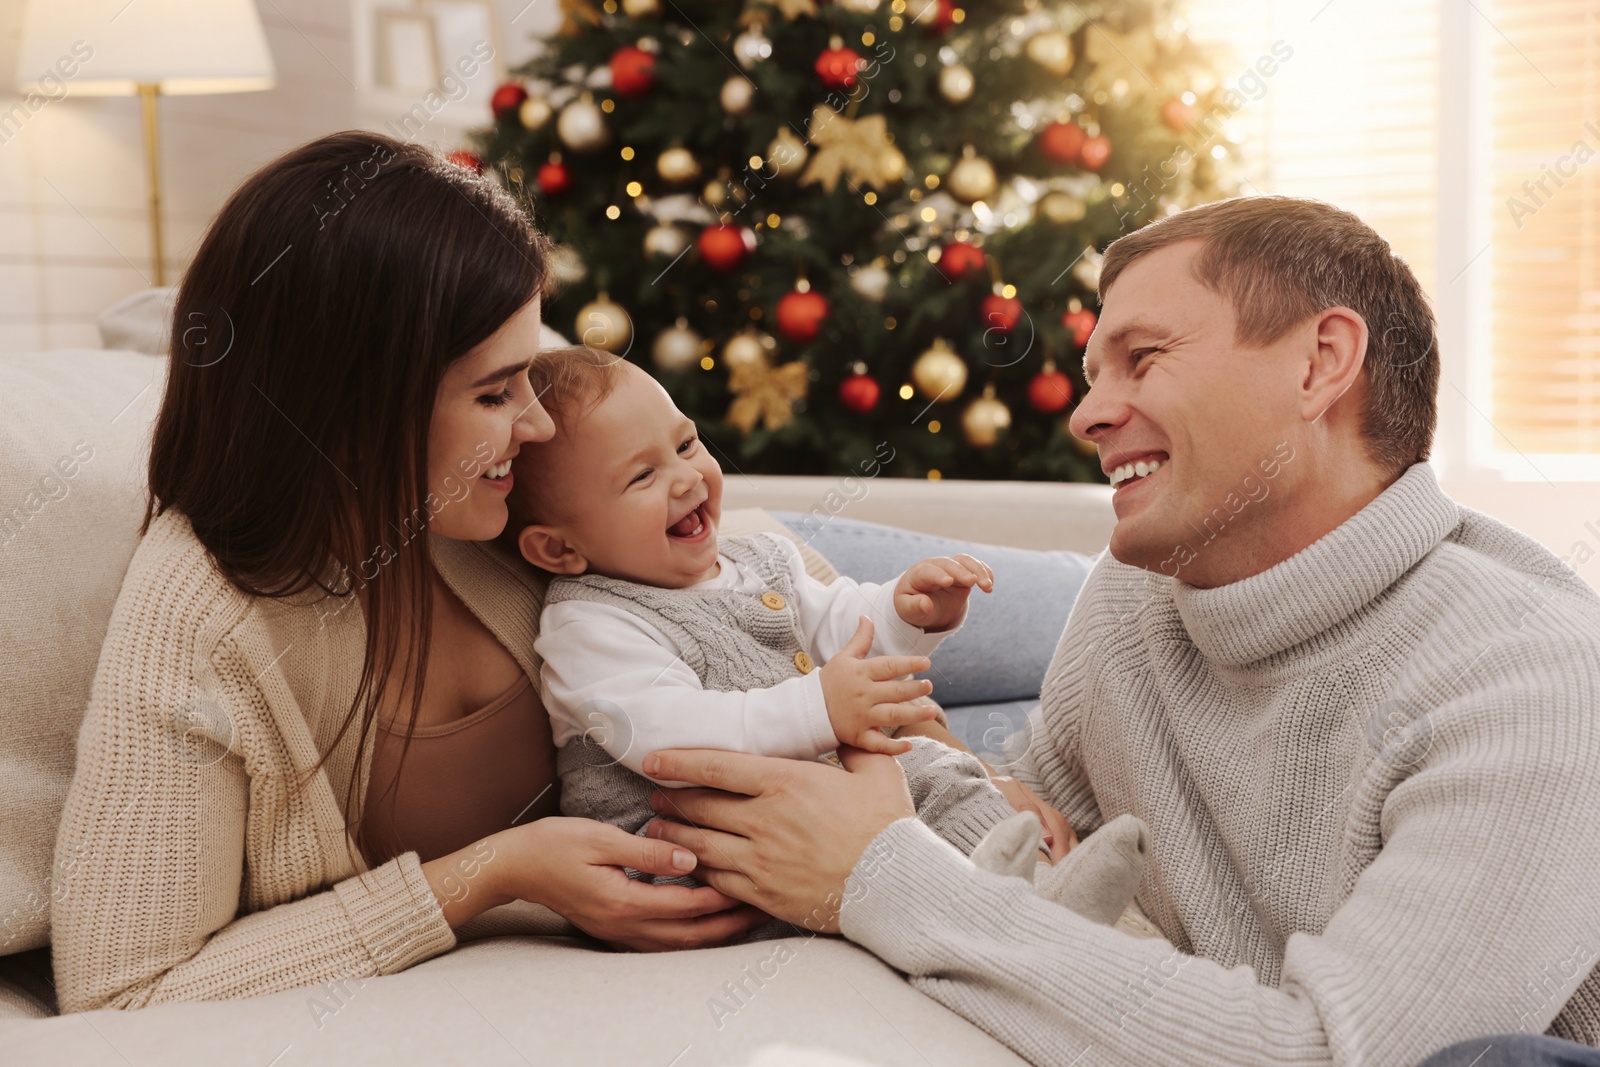 Photo of Happy couple with cute baby in living room decorated for Christmas